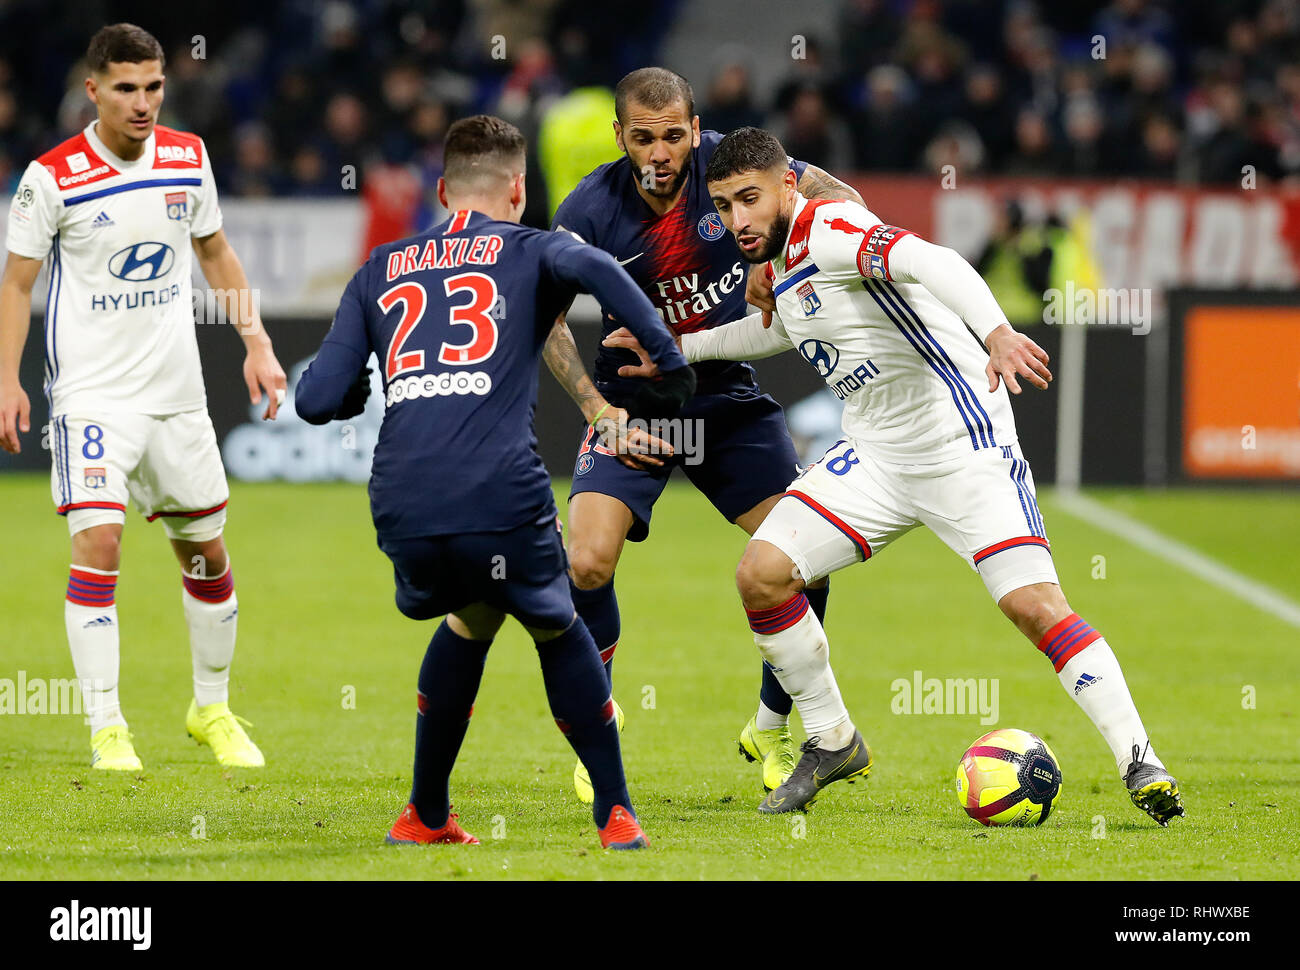 Lyon, France. 3rd Feb, 2019. Nabil Fekir of Lyon (1st R) competes during  the match of French Ligue 1 2018-19 season 23rd round match between Lyon  and Paris Saint-Germain in Lyon, France,